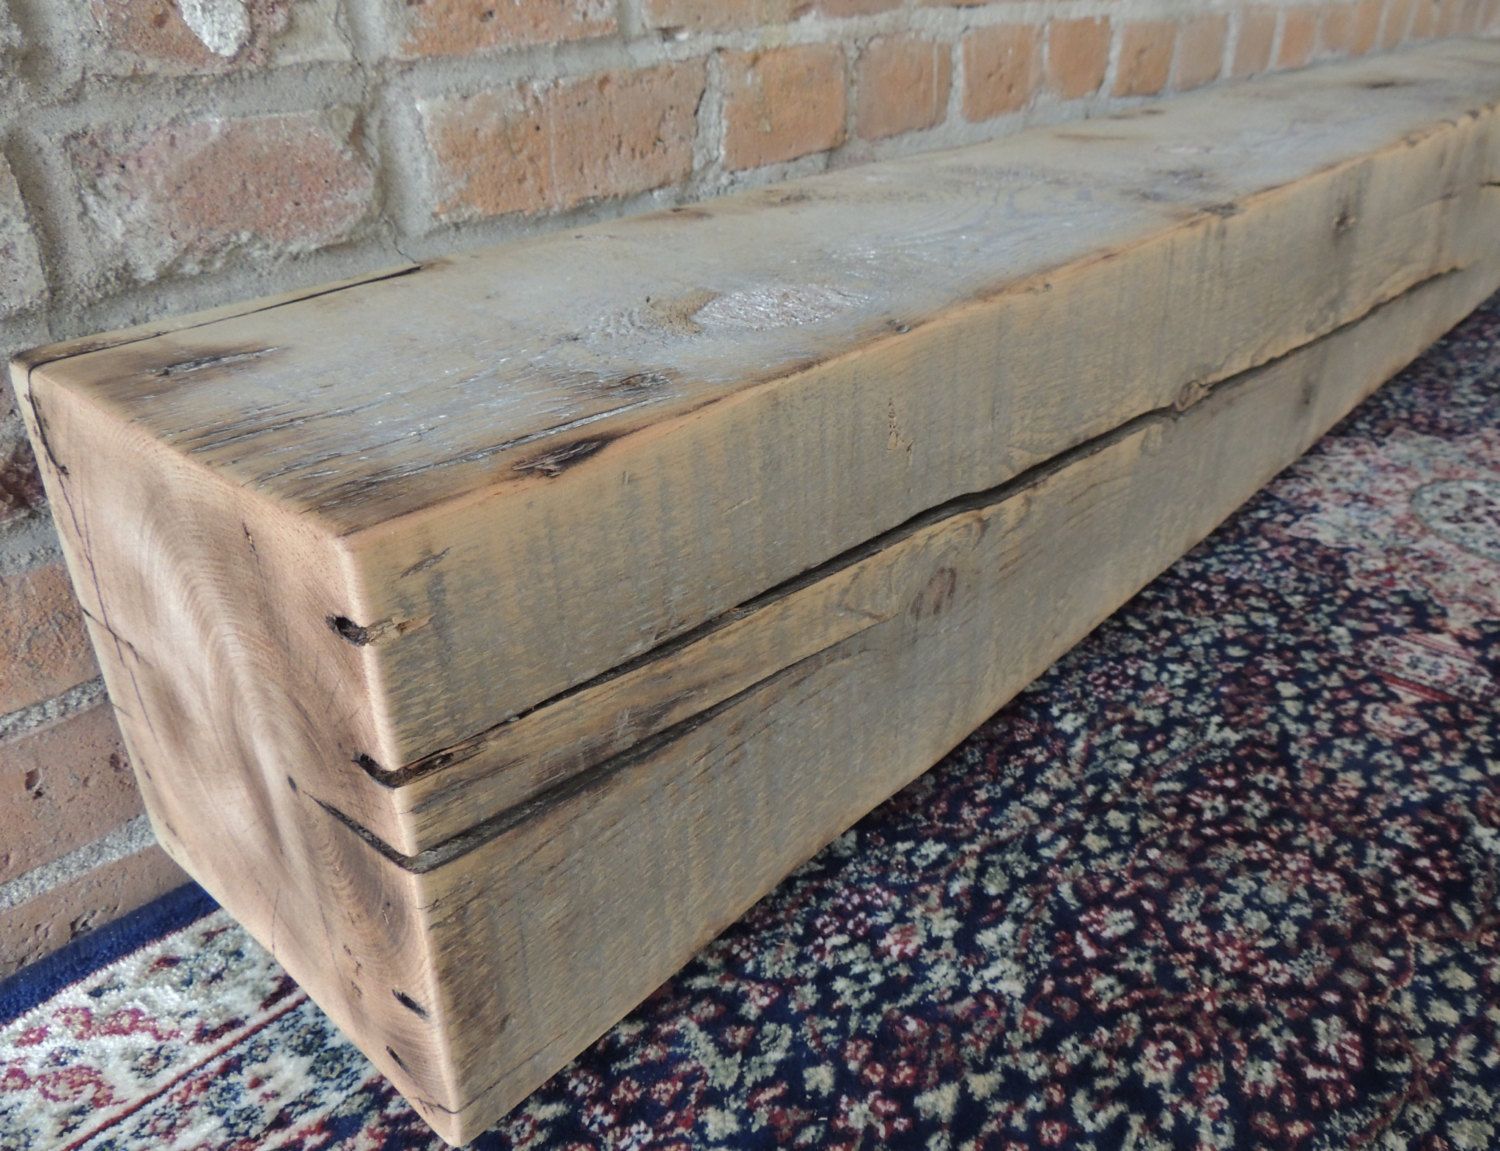 Salvaged Fireplace Mantels Luxury Reclaimed Wood Fireplace Mantel 66 X 8 X 8 Reclaimed Wood